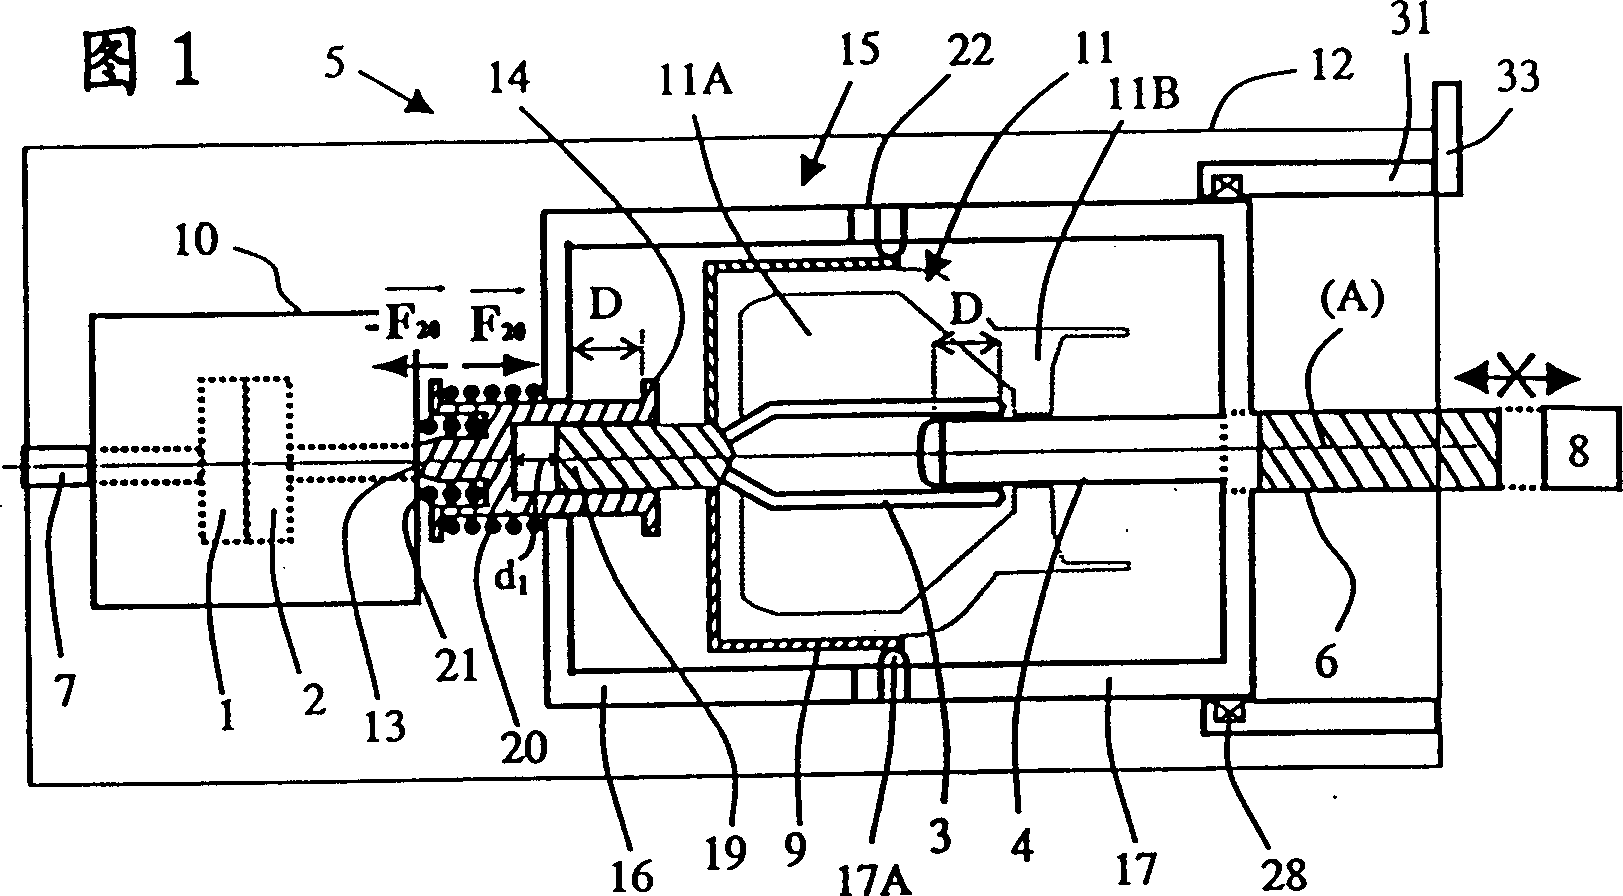 High voltage or medium voltage switch device composed of vacuum and gas circuit breaker